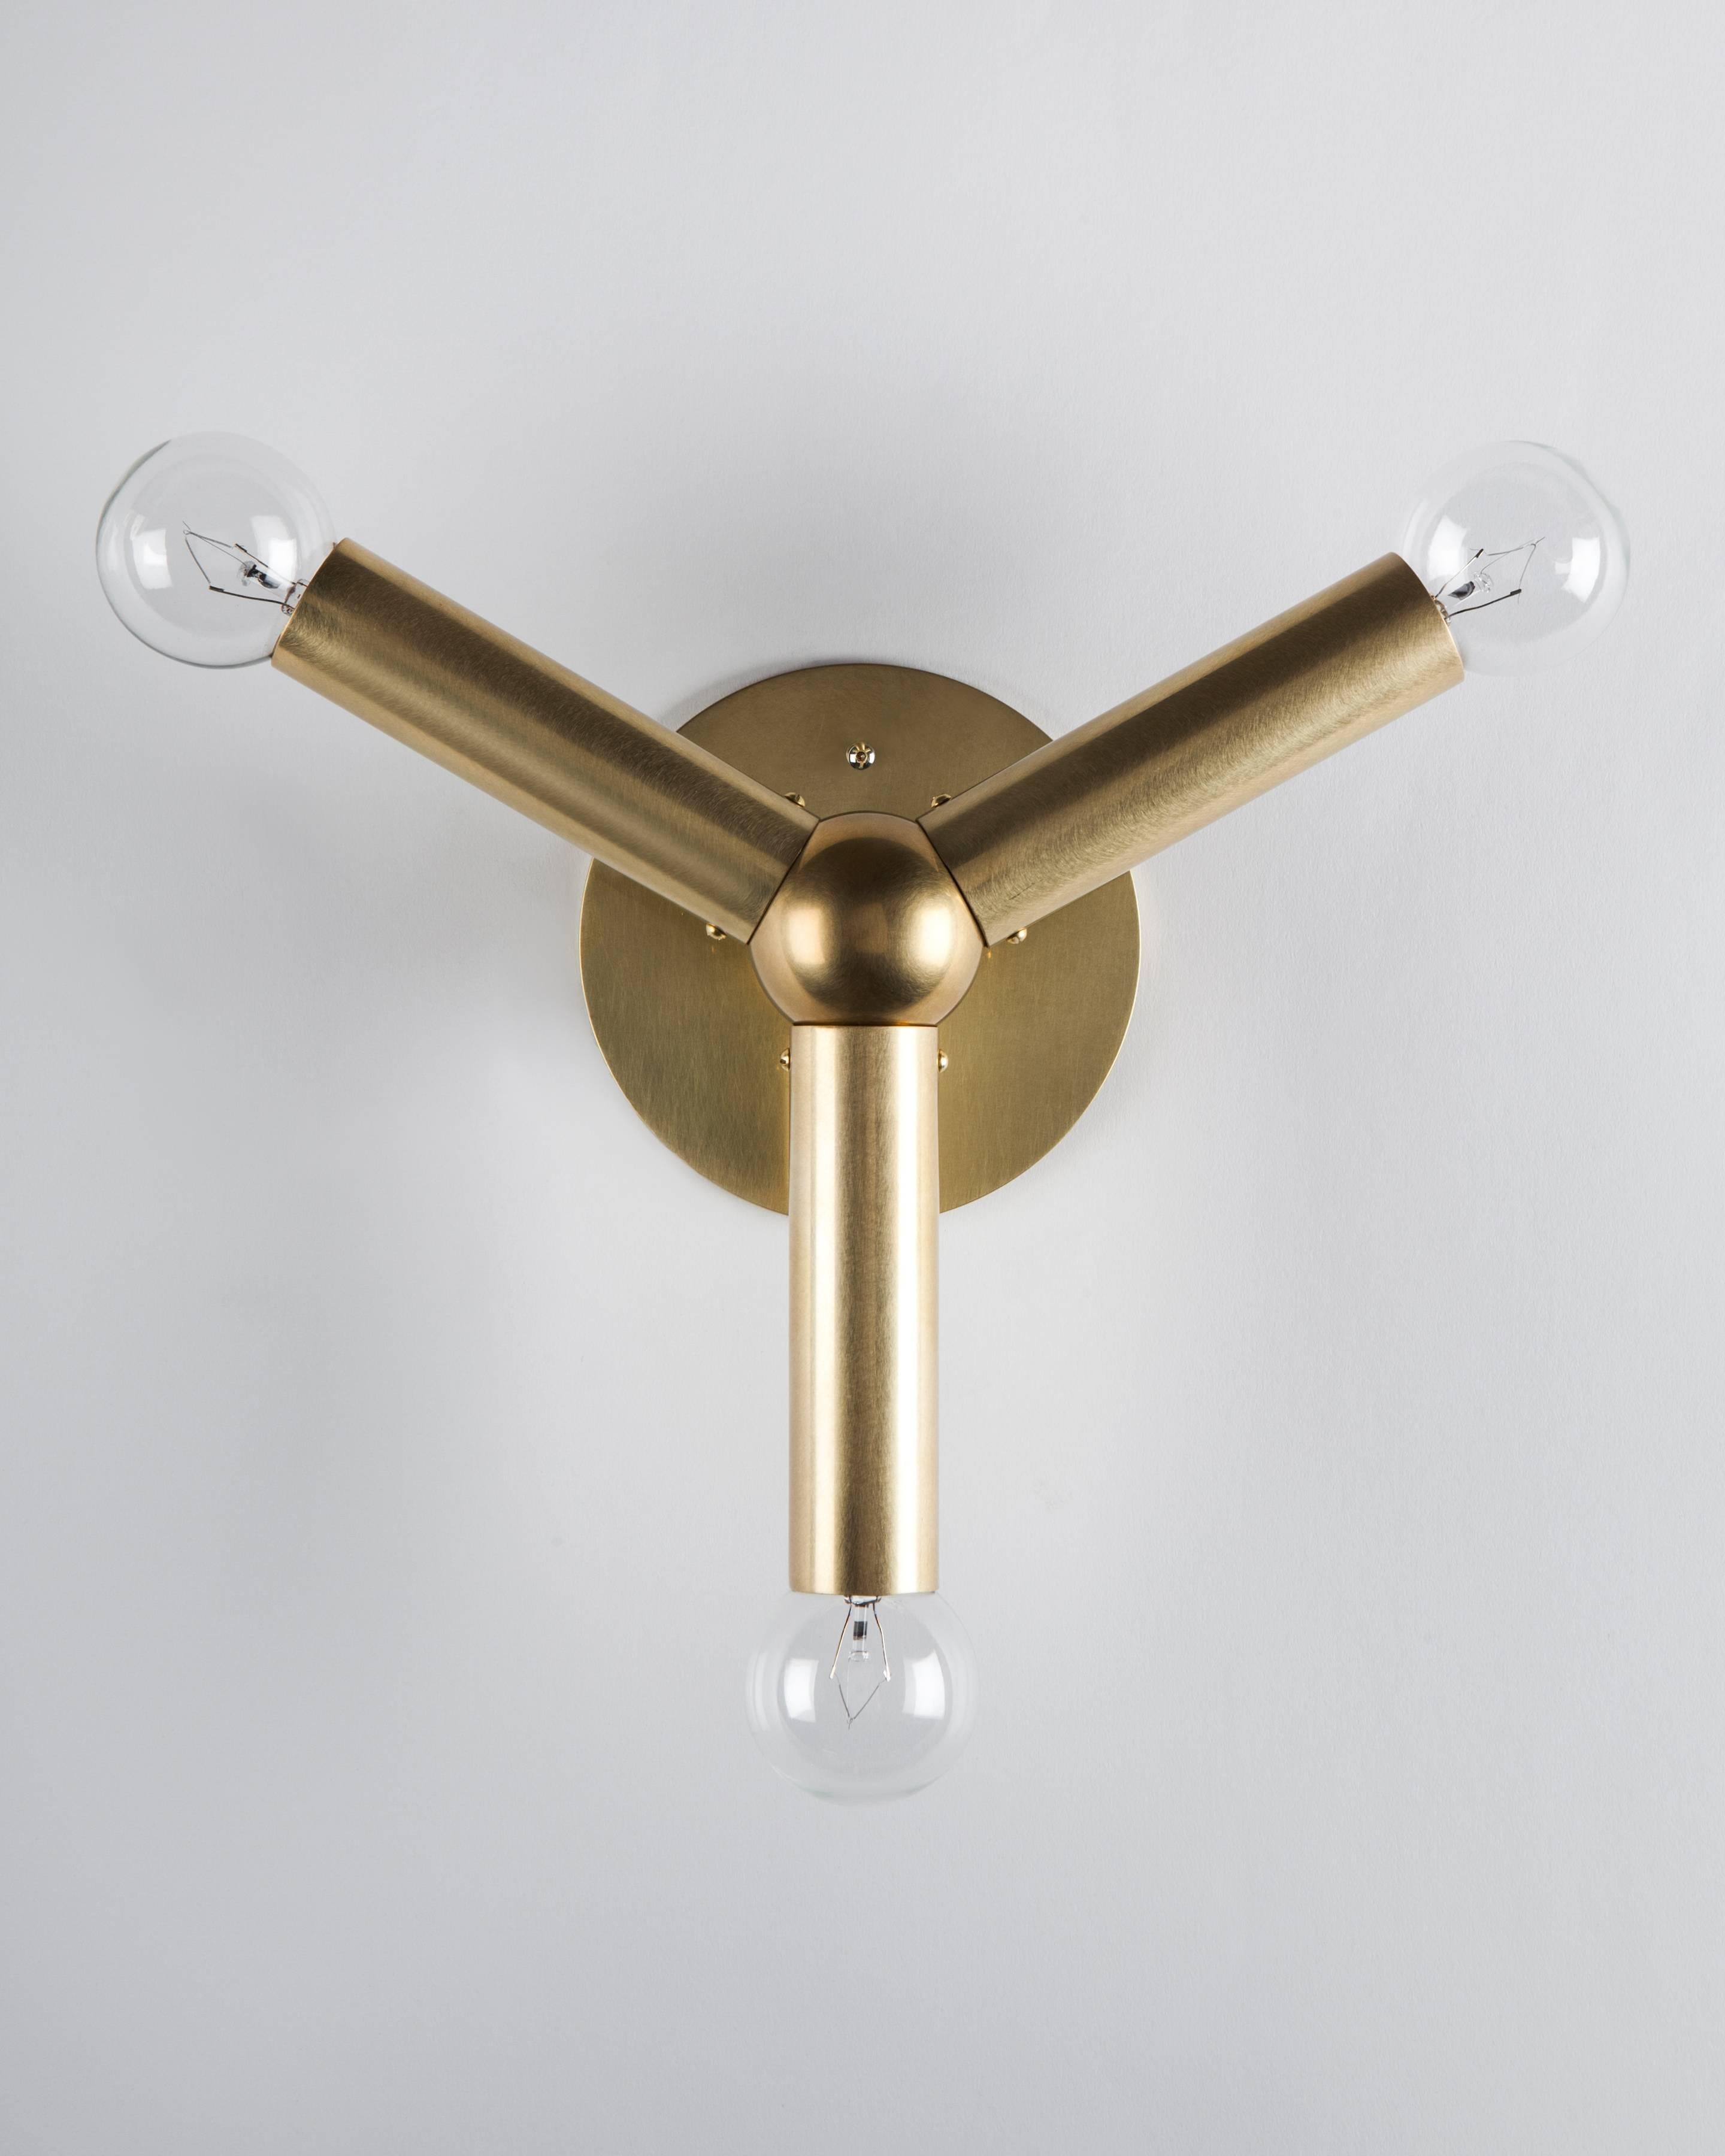 American Molecule Wall Sconce designed by Robert and Trix Haussmann for Remains Lighting